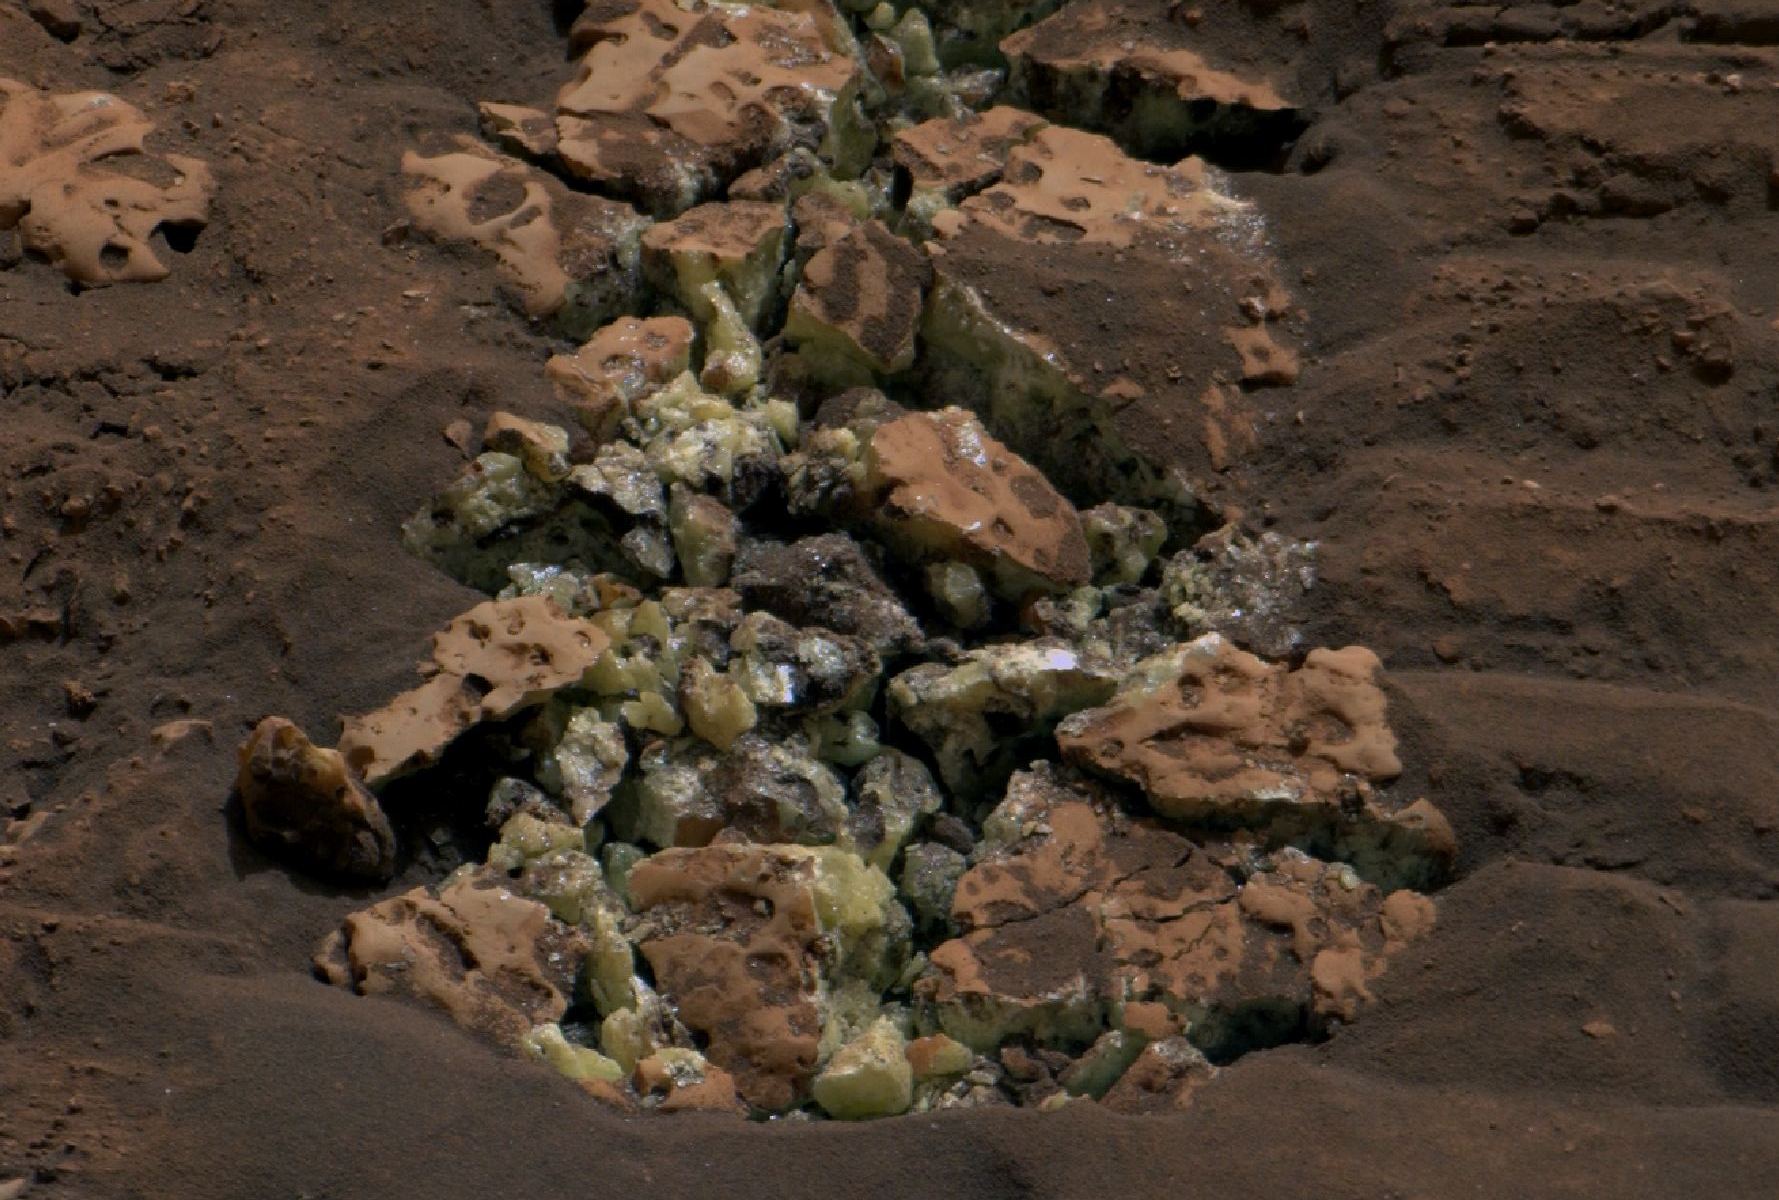 The Mars Curiosity rover rolled over this rock containing pure sulfur crystals in May. Planetary scientists are still trying to figure out how the sulfur got there. NASA/JPL-Caltech/MSSS